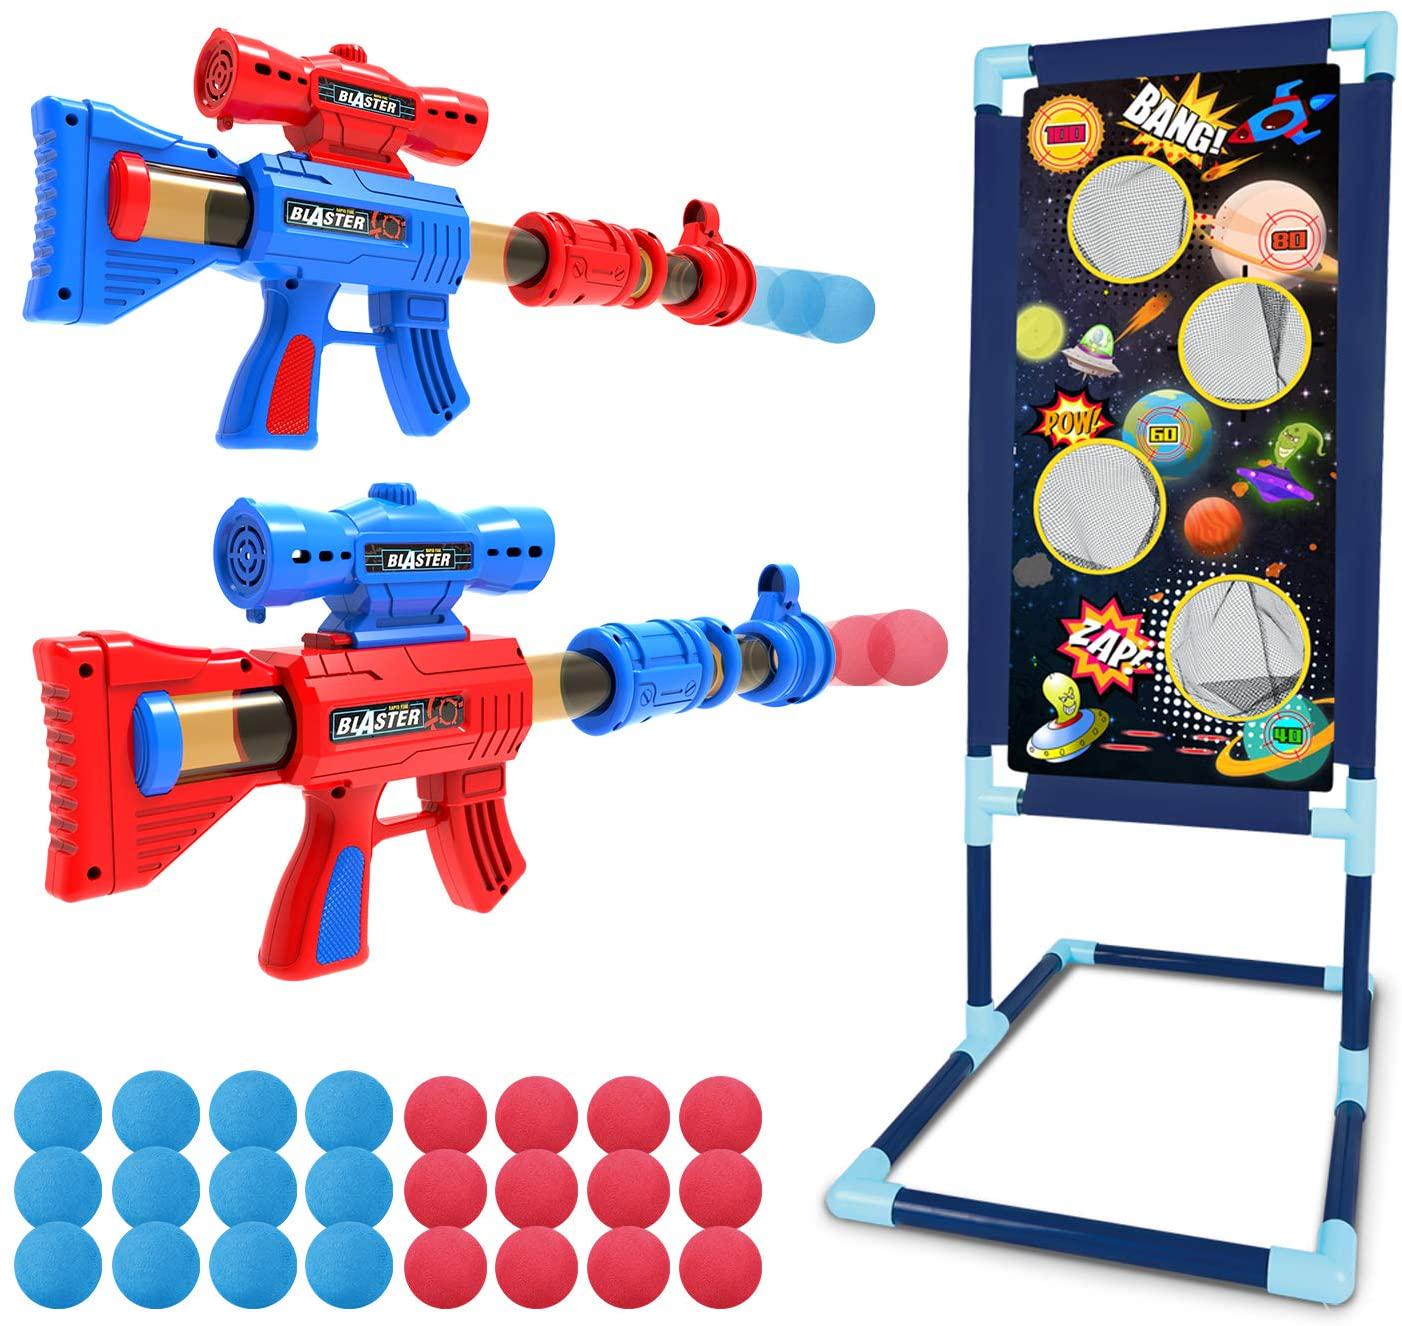 LURLIN, LURLIN Shooting Game Toy for Age 5, 6, 7, 8,9,10+ Years Old Kids, Boys - 2pk Foam Ball Popper Air Guns and Shooting Target and 24 Foam Balls - Ideal Gift - Compatible with Nerf Toy Guns